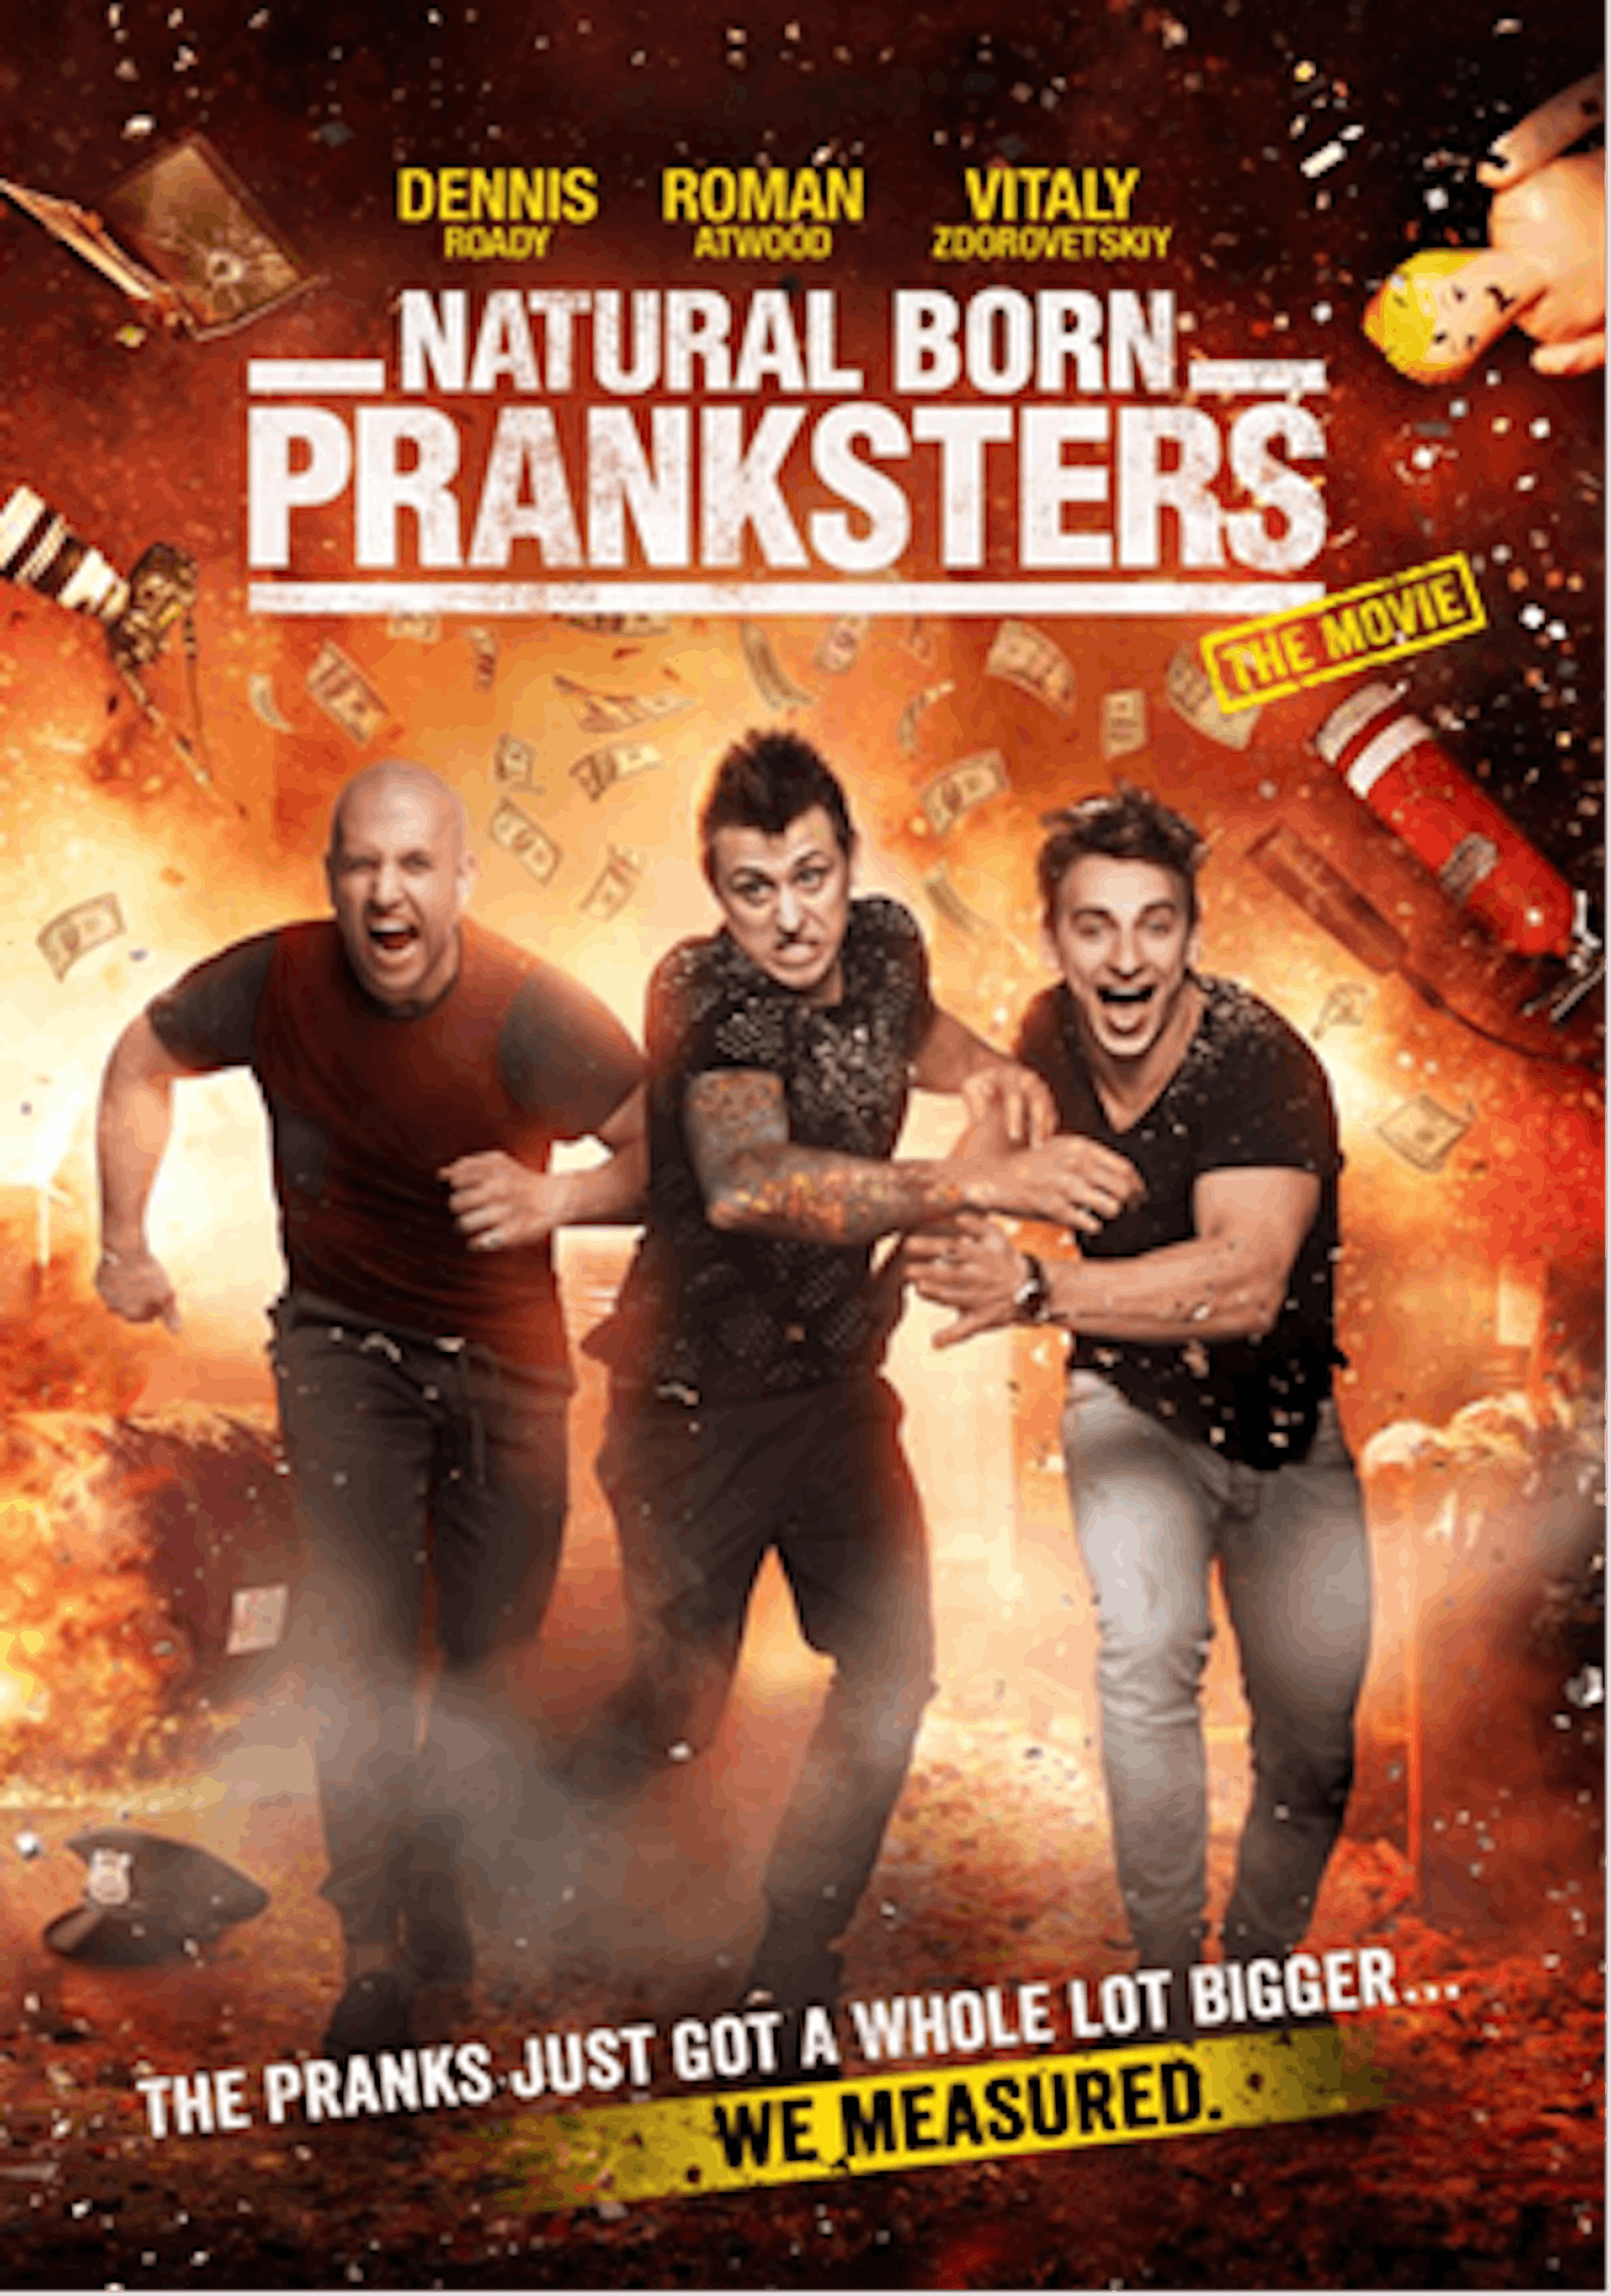 Natural Born Pranksters will open in theaters April 1.